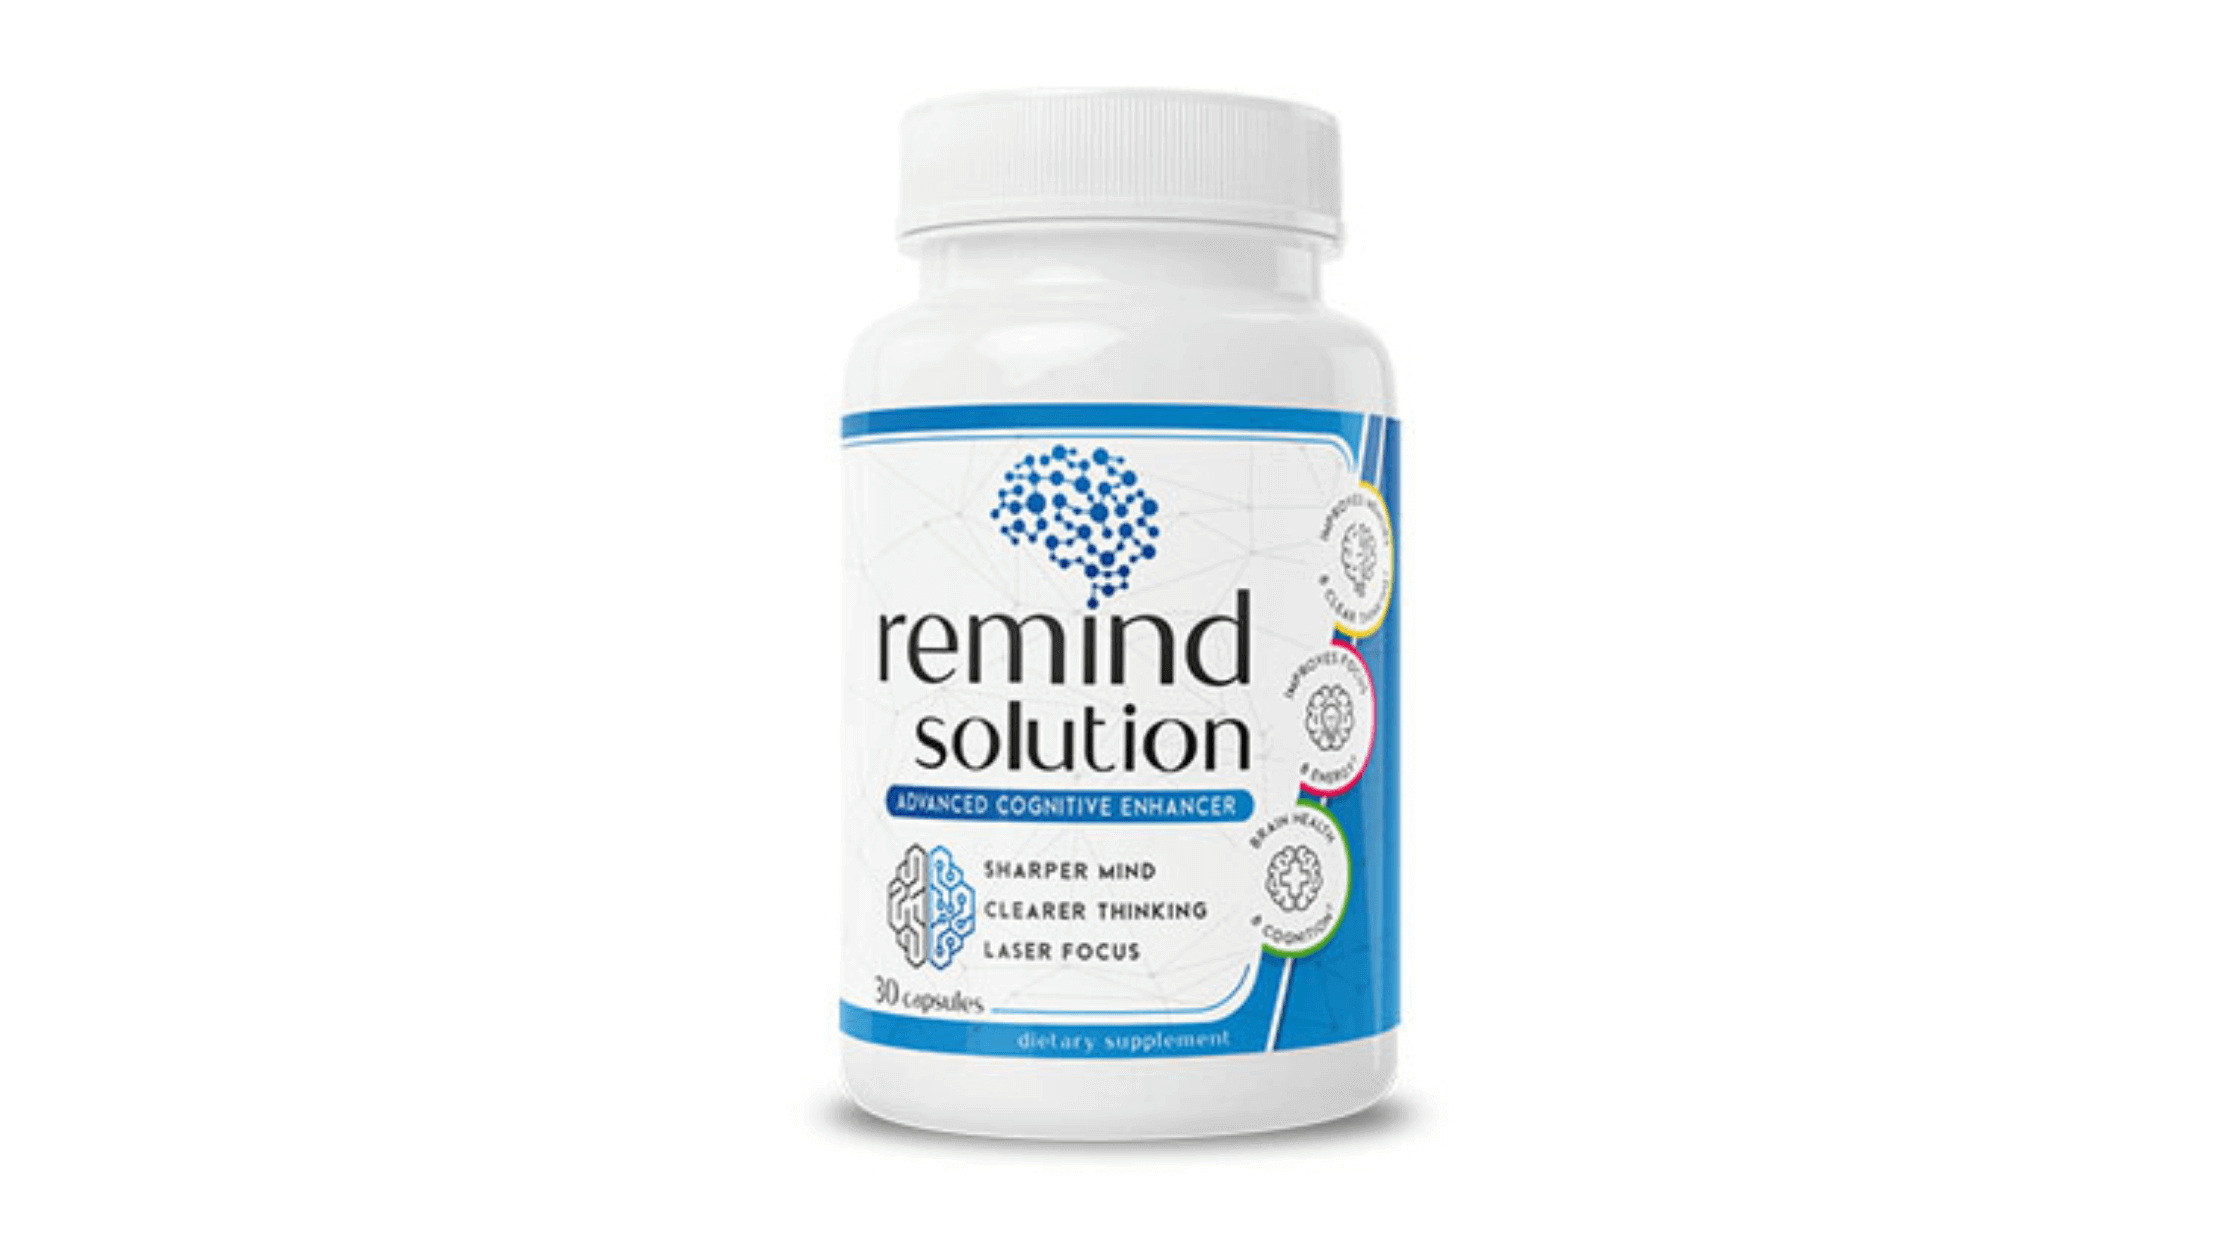 Aabb_ccremind-solution-reviews